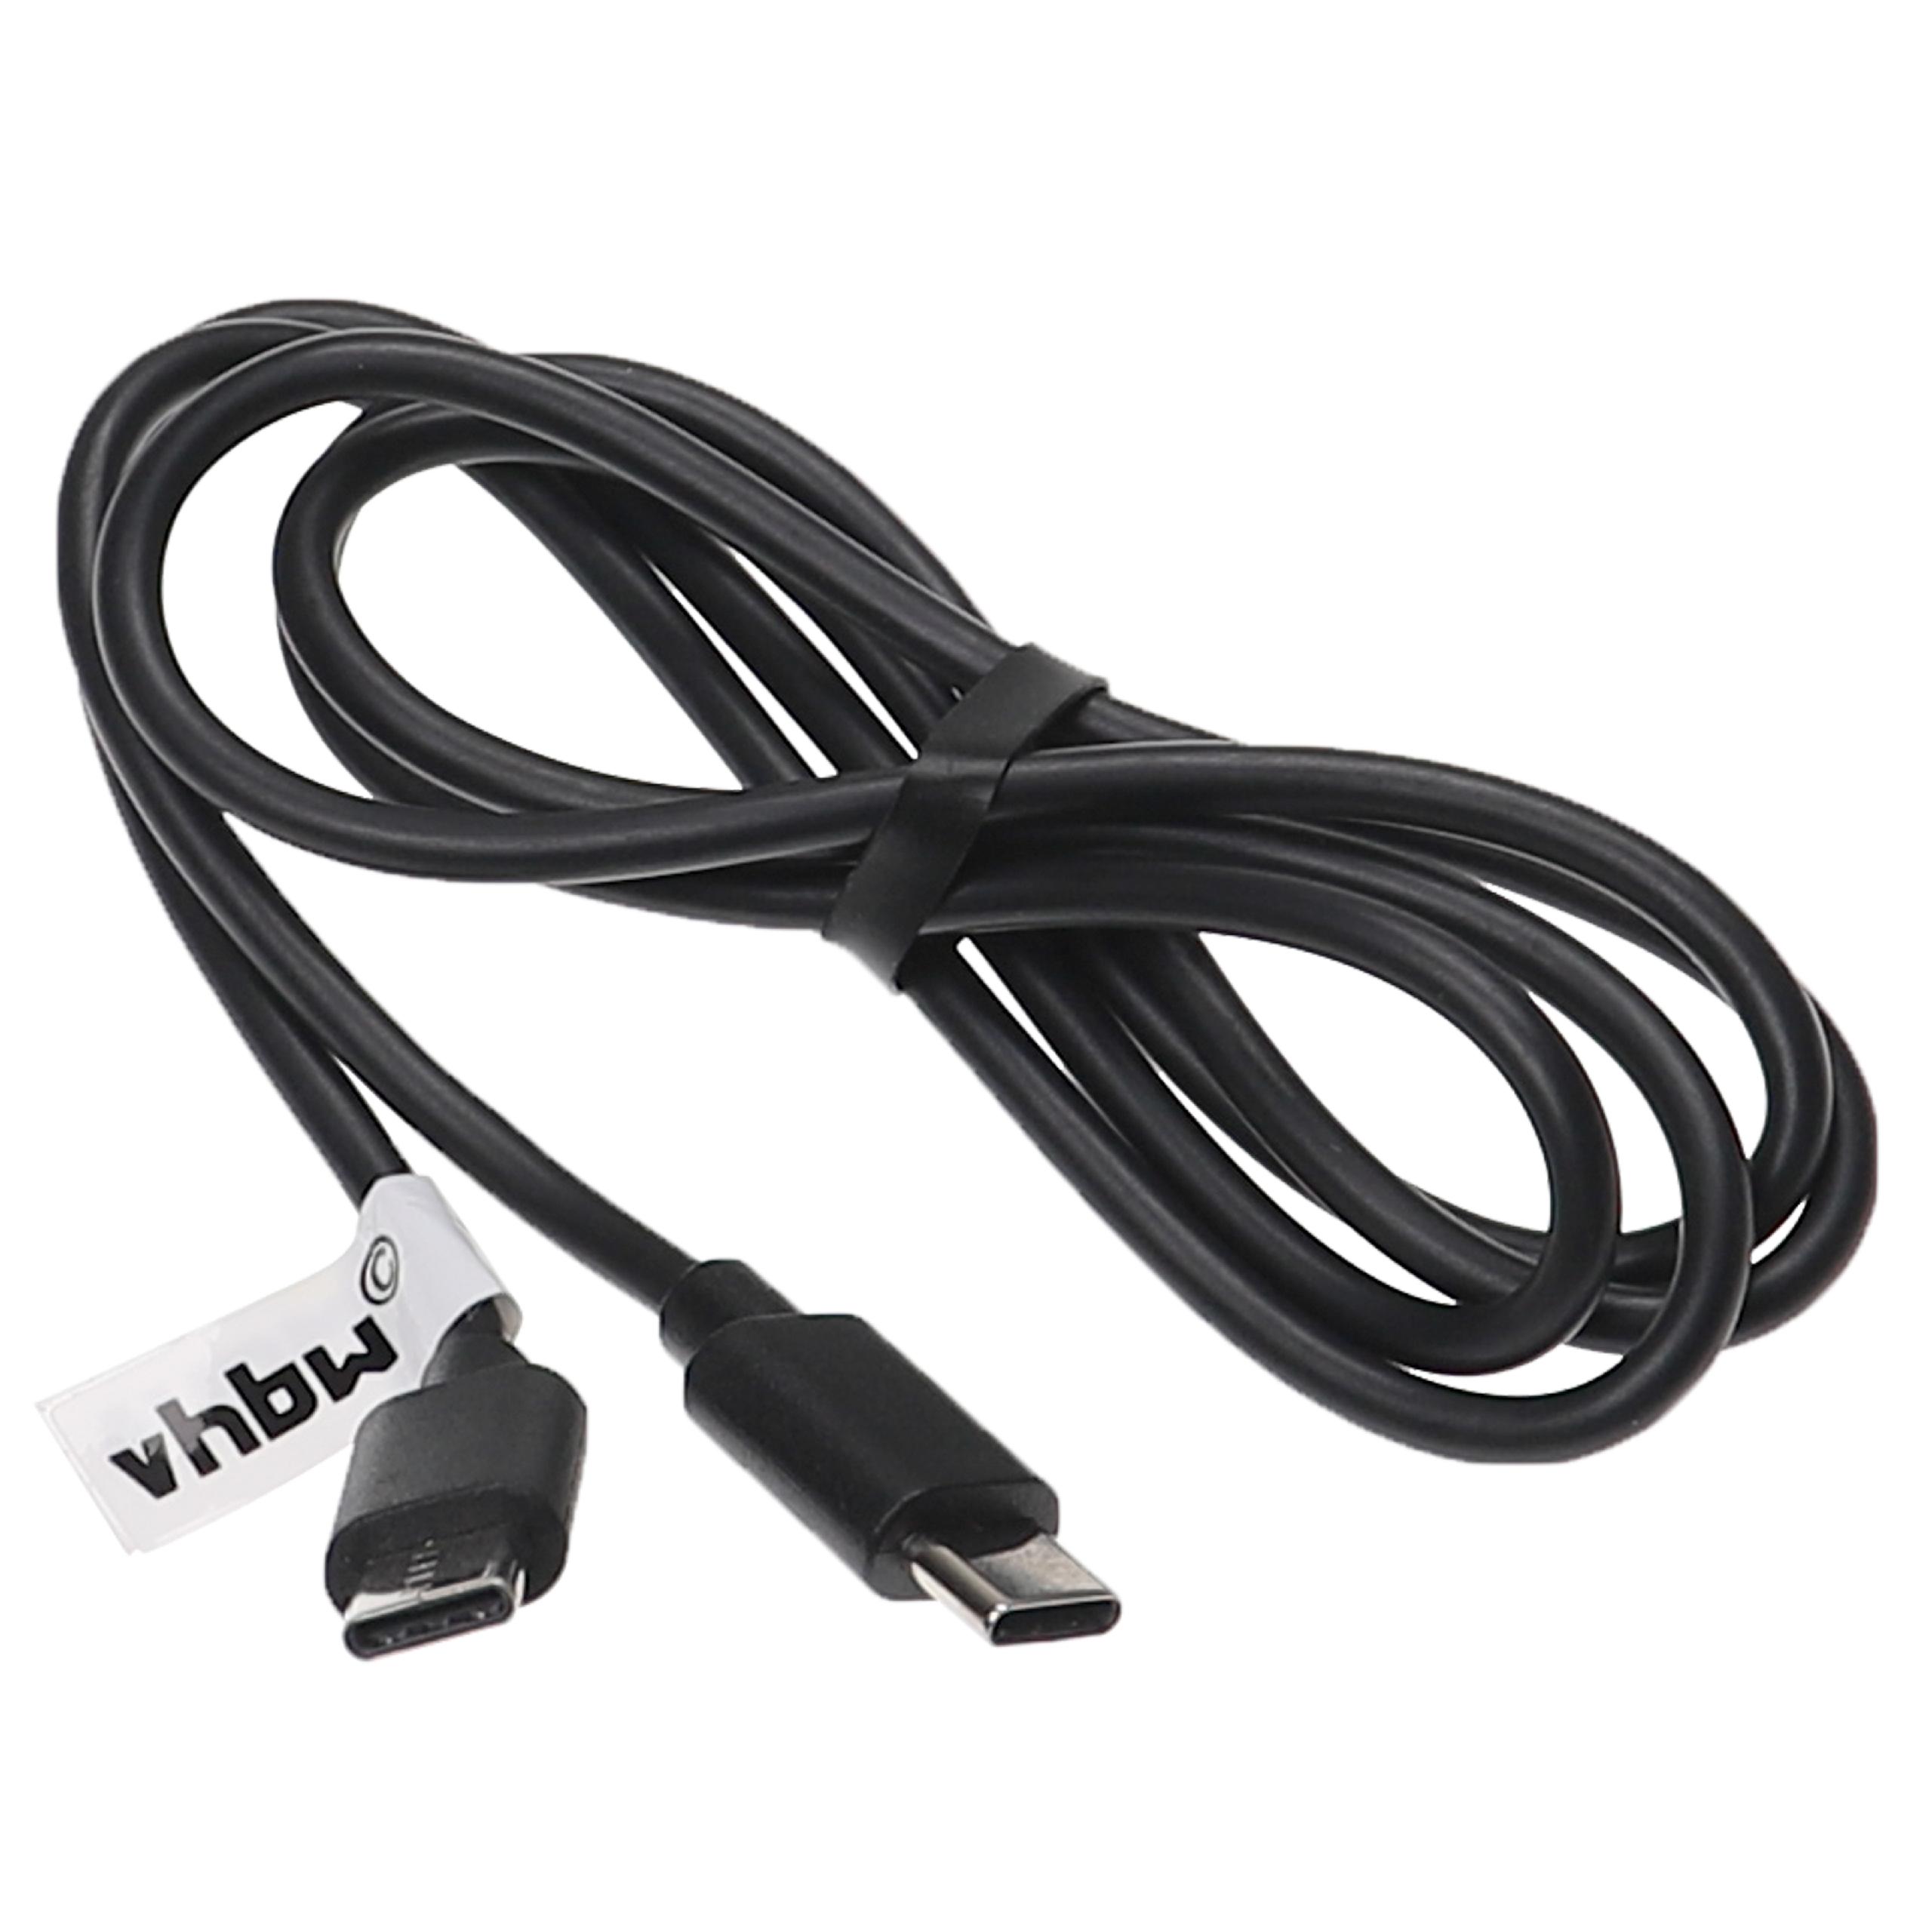 USB C Charging Cable suitable for various Laptops, Tablets, Smartphones - USB C Cable, 1 m, Black